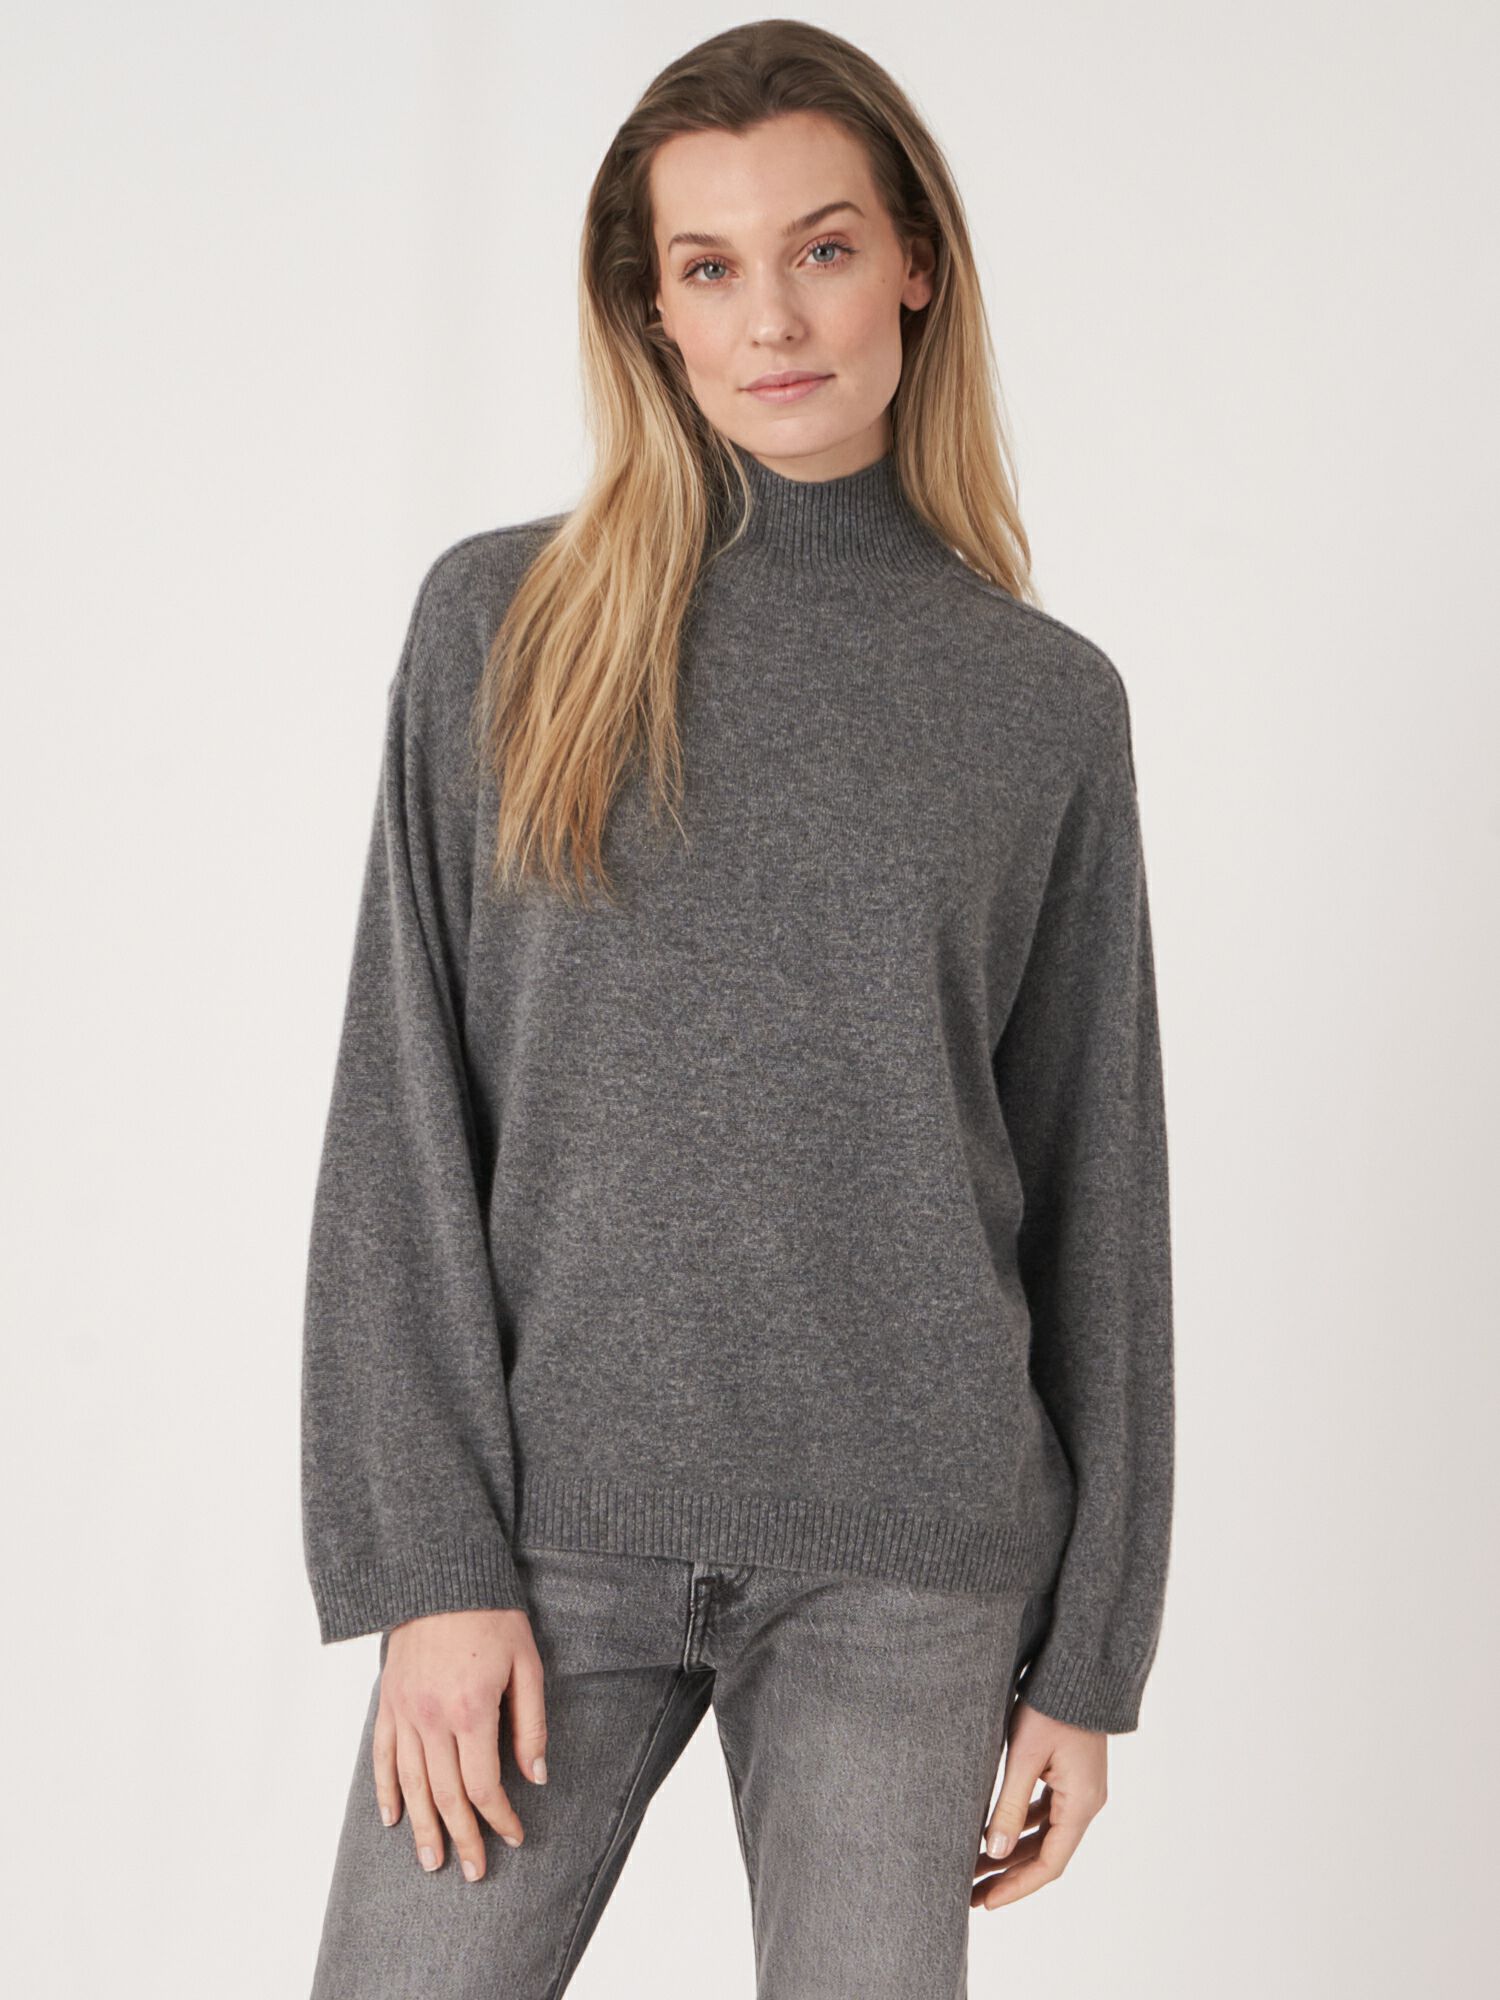 Loose fit organic cashmere with slit stand collar